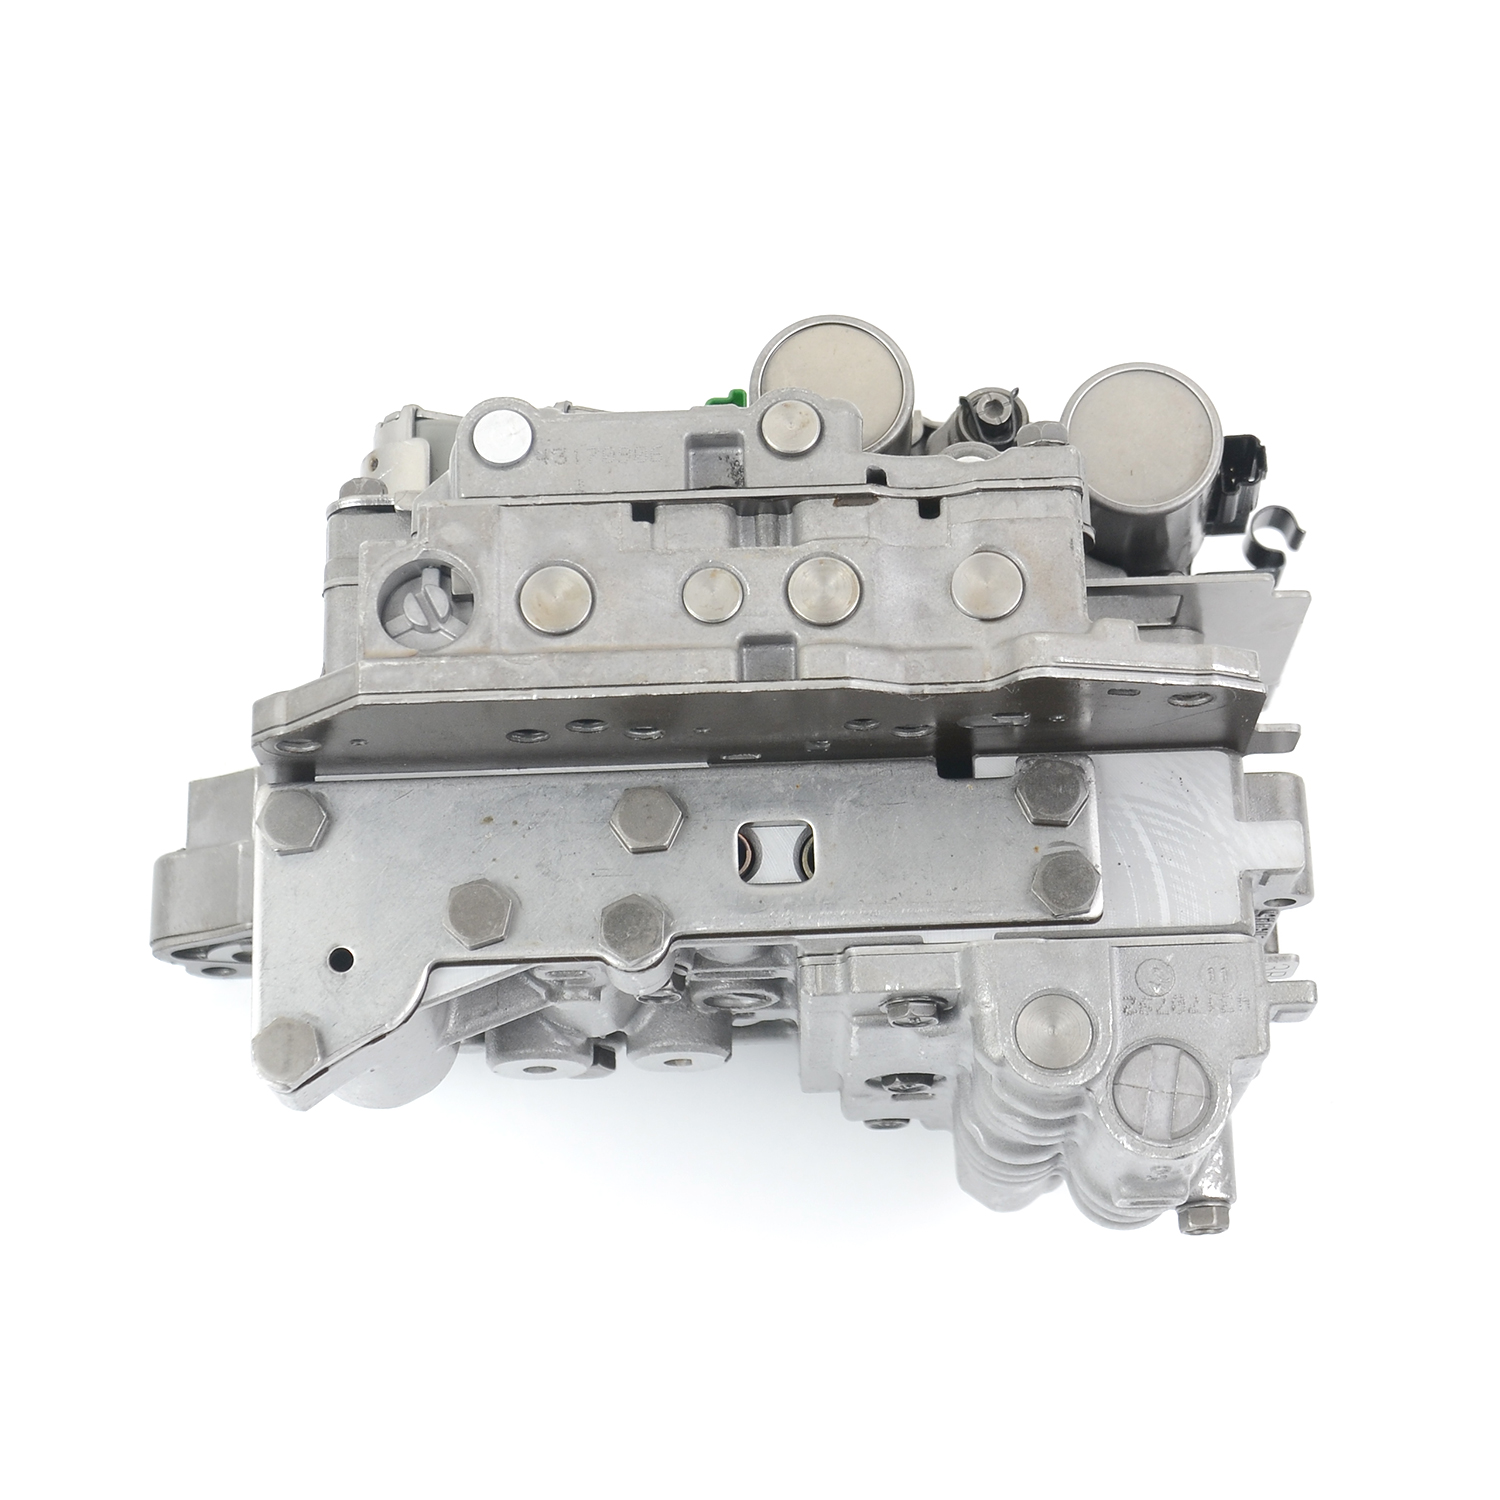 AP02 AF33-5 AW55-50SN AW55-51SN RE5F RE5F22A Transmission Solenoid Valves Body for Volvo Saab Alfa Romeo Fiat